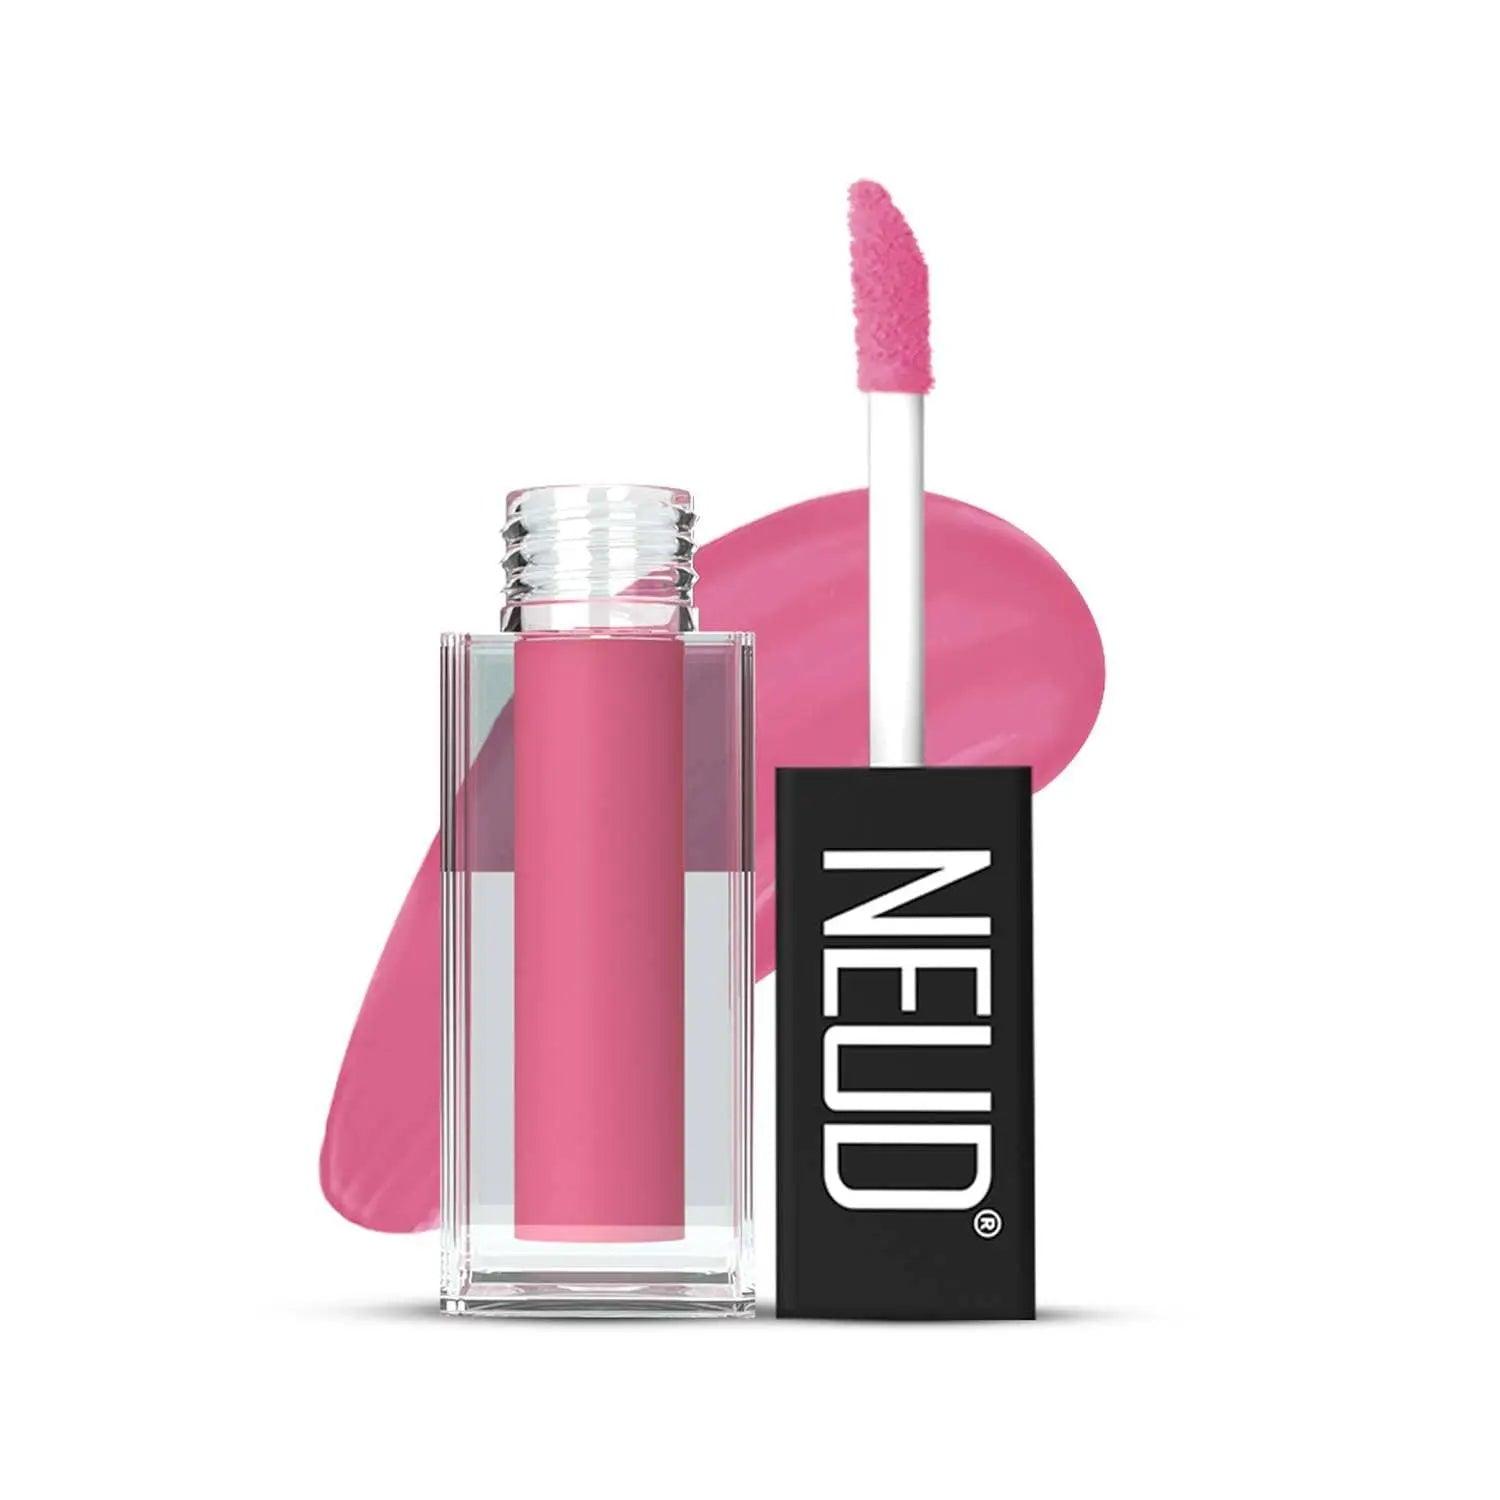 NEUD Matte Liquid Lipstick Supple Candy with Jojoba Oil, Vitamin E and Almond Oil - Smudge Proof 12-hour Stay Formula with Free Lip Gloss 8906116281147